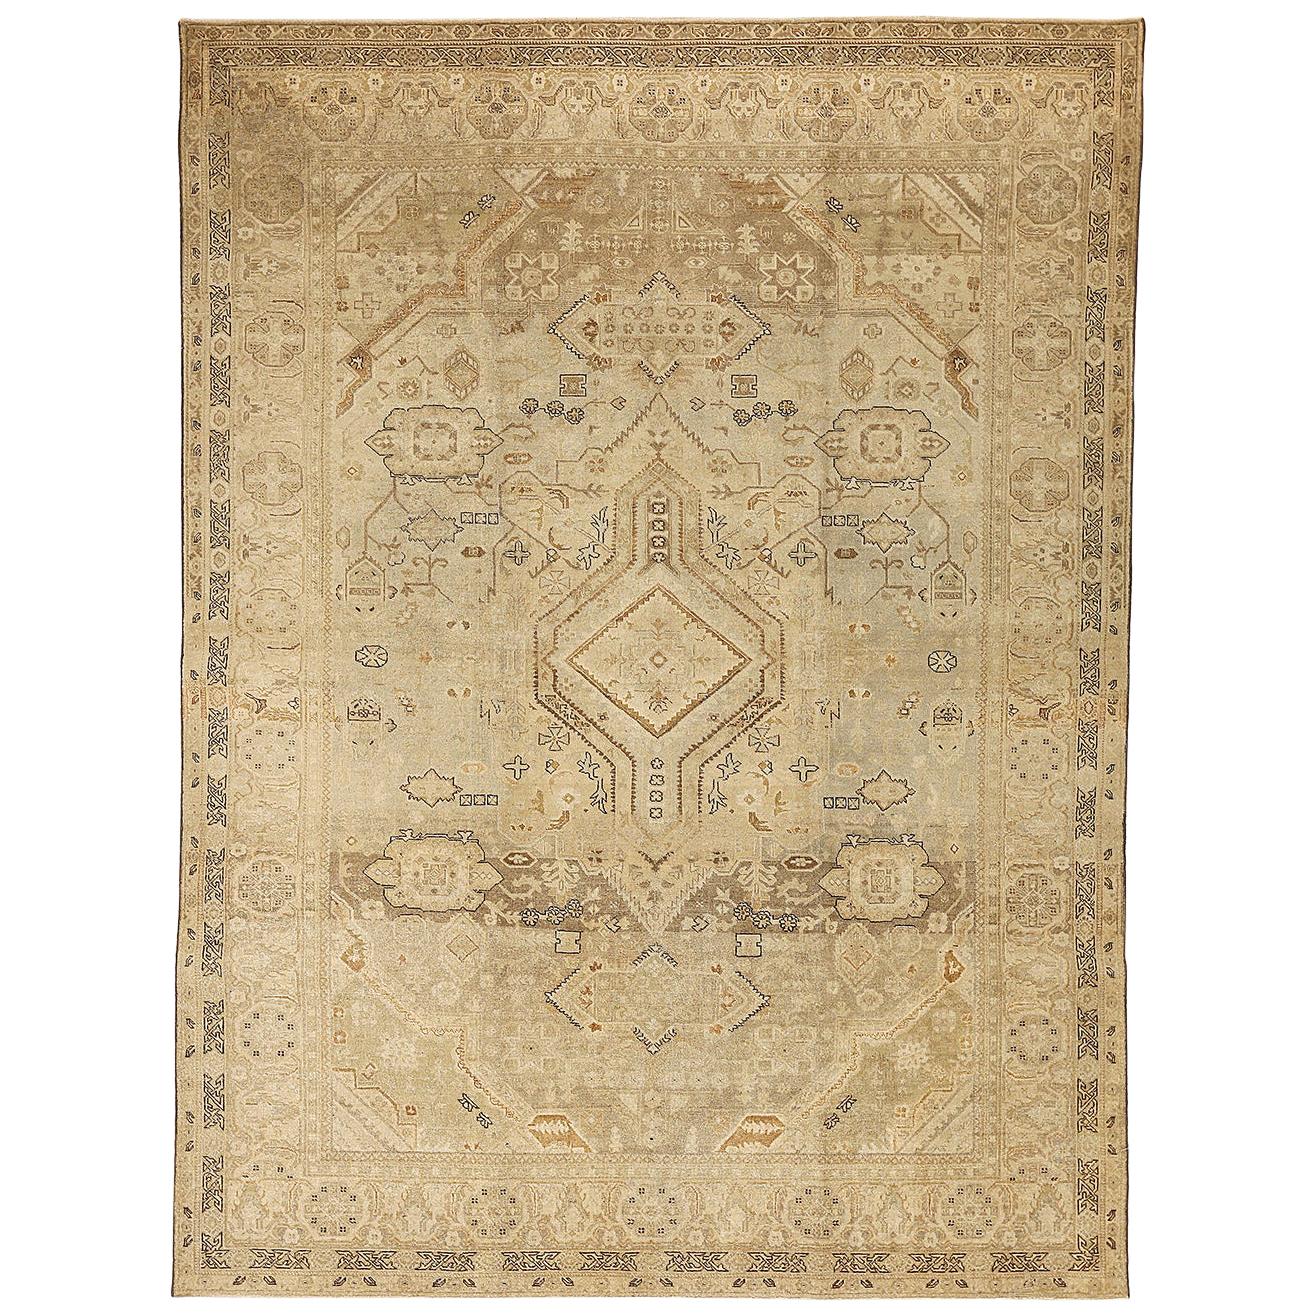 Antique Persian Tabriz Rug with Brown & Beige Floral Field